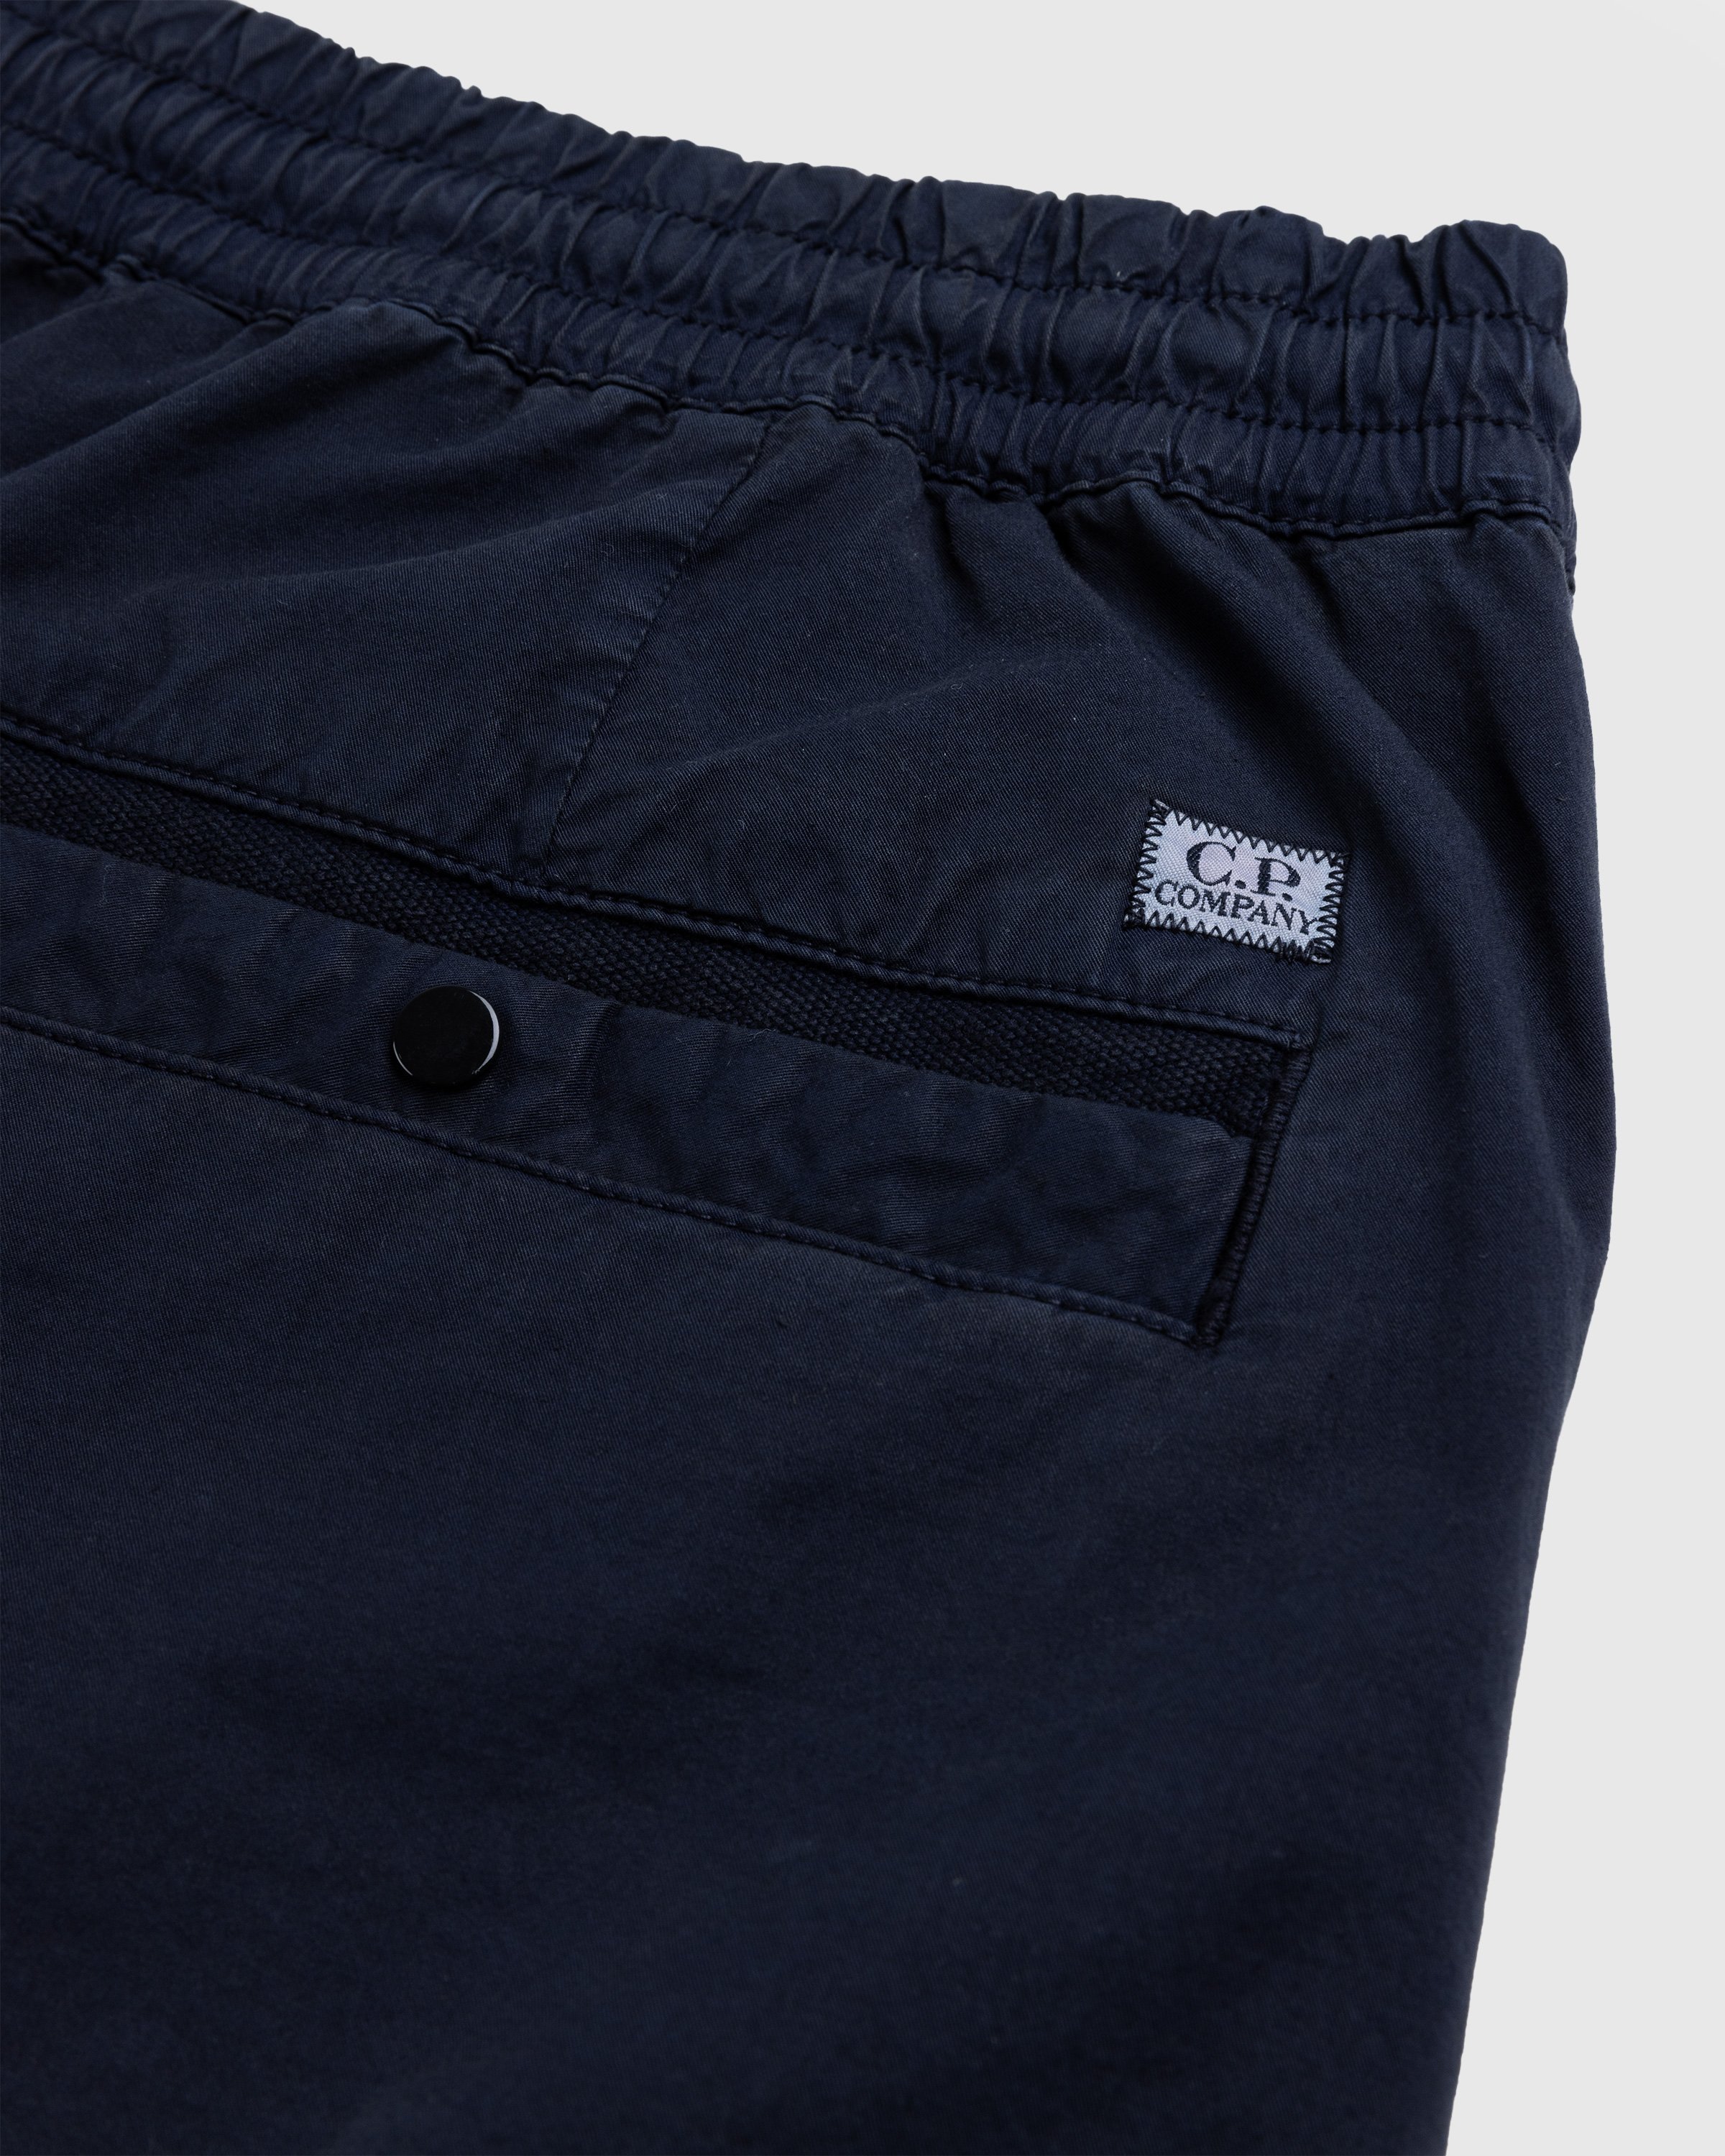 C.P. Company - Twill Stretch Utility Shorts Total Eclipse Blue - Clothing - Blue - Image 5